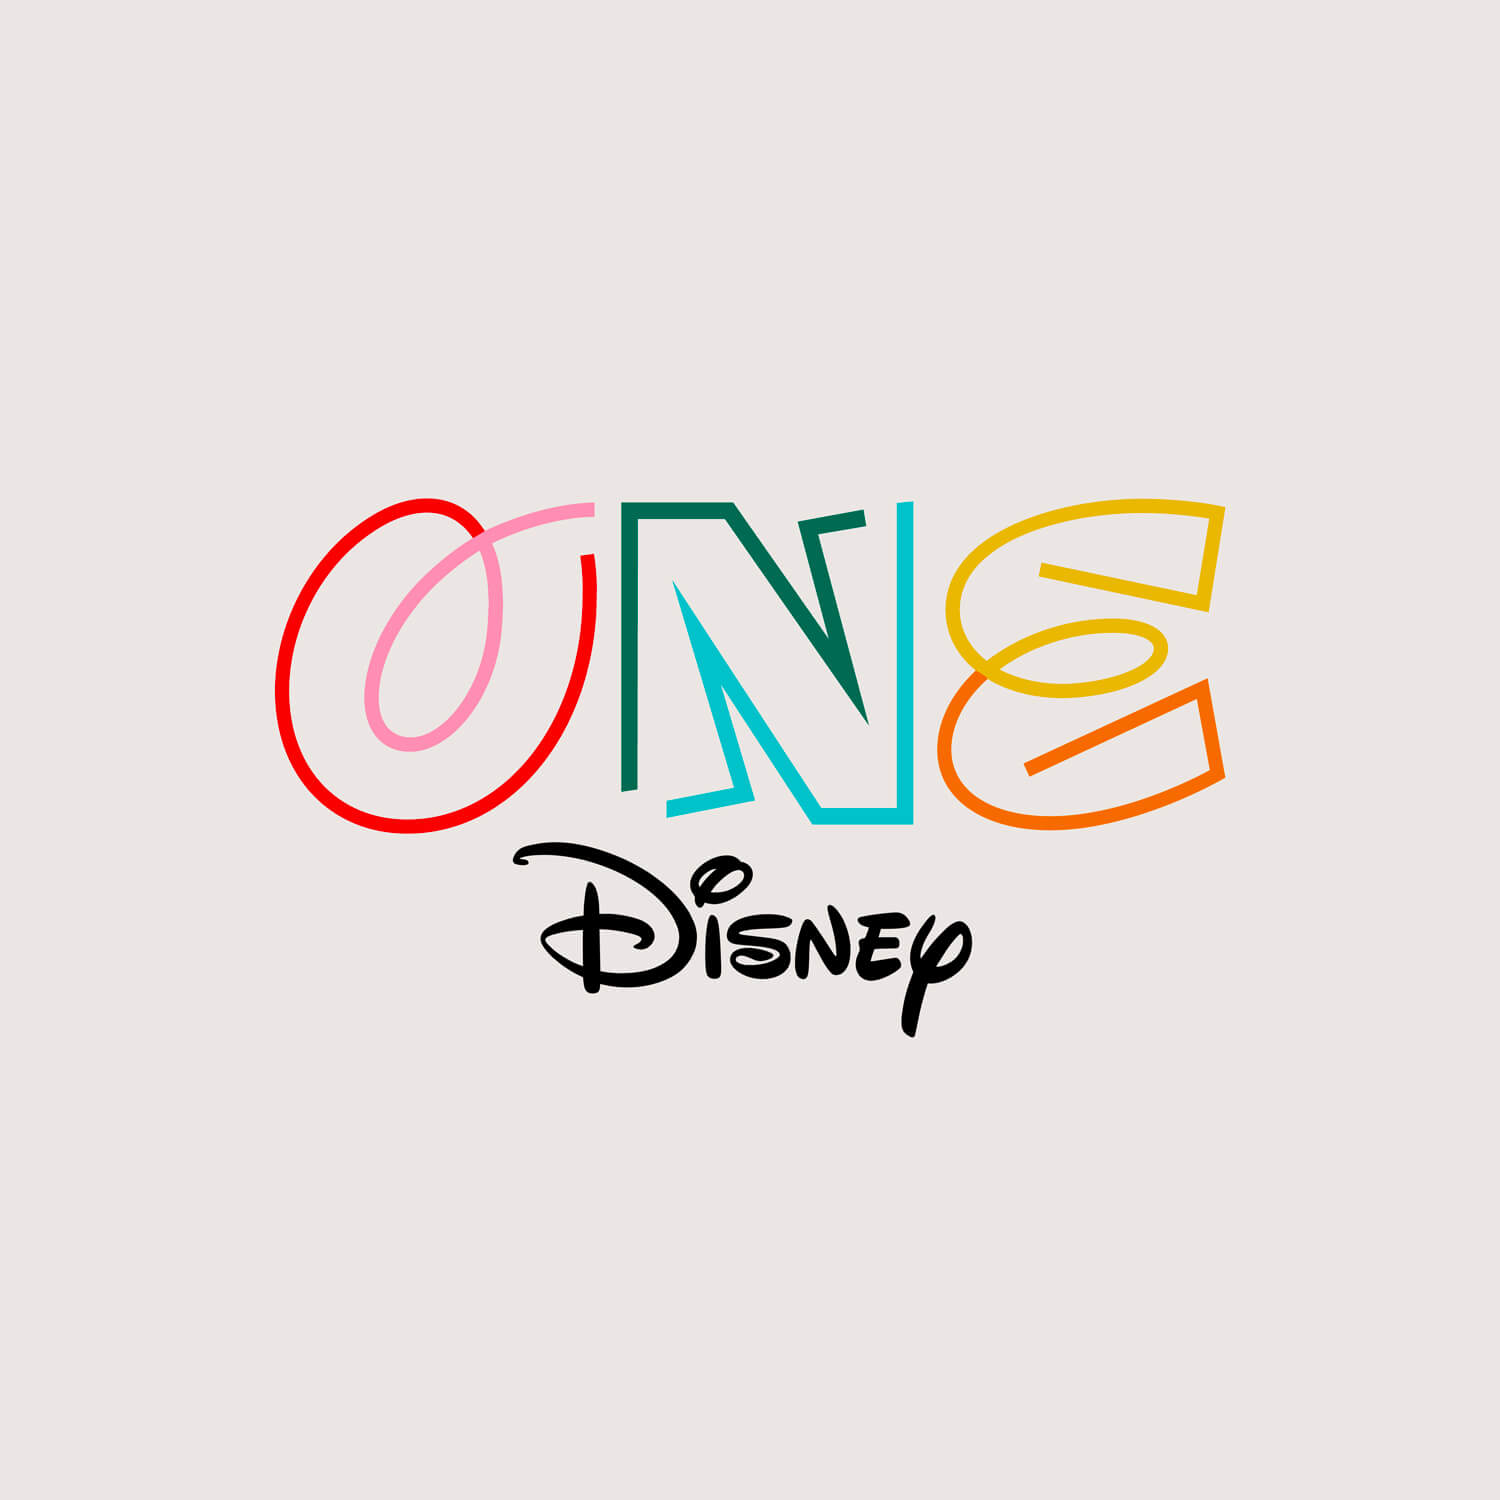 One Disney DDI Trade Positioning Concept by Imaginary Friends